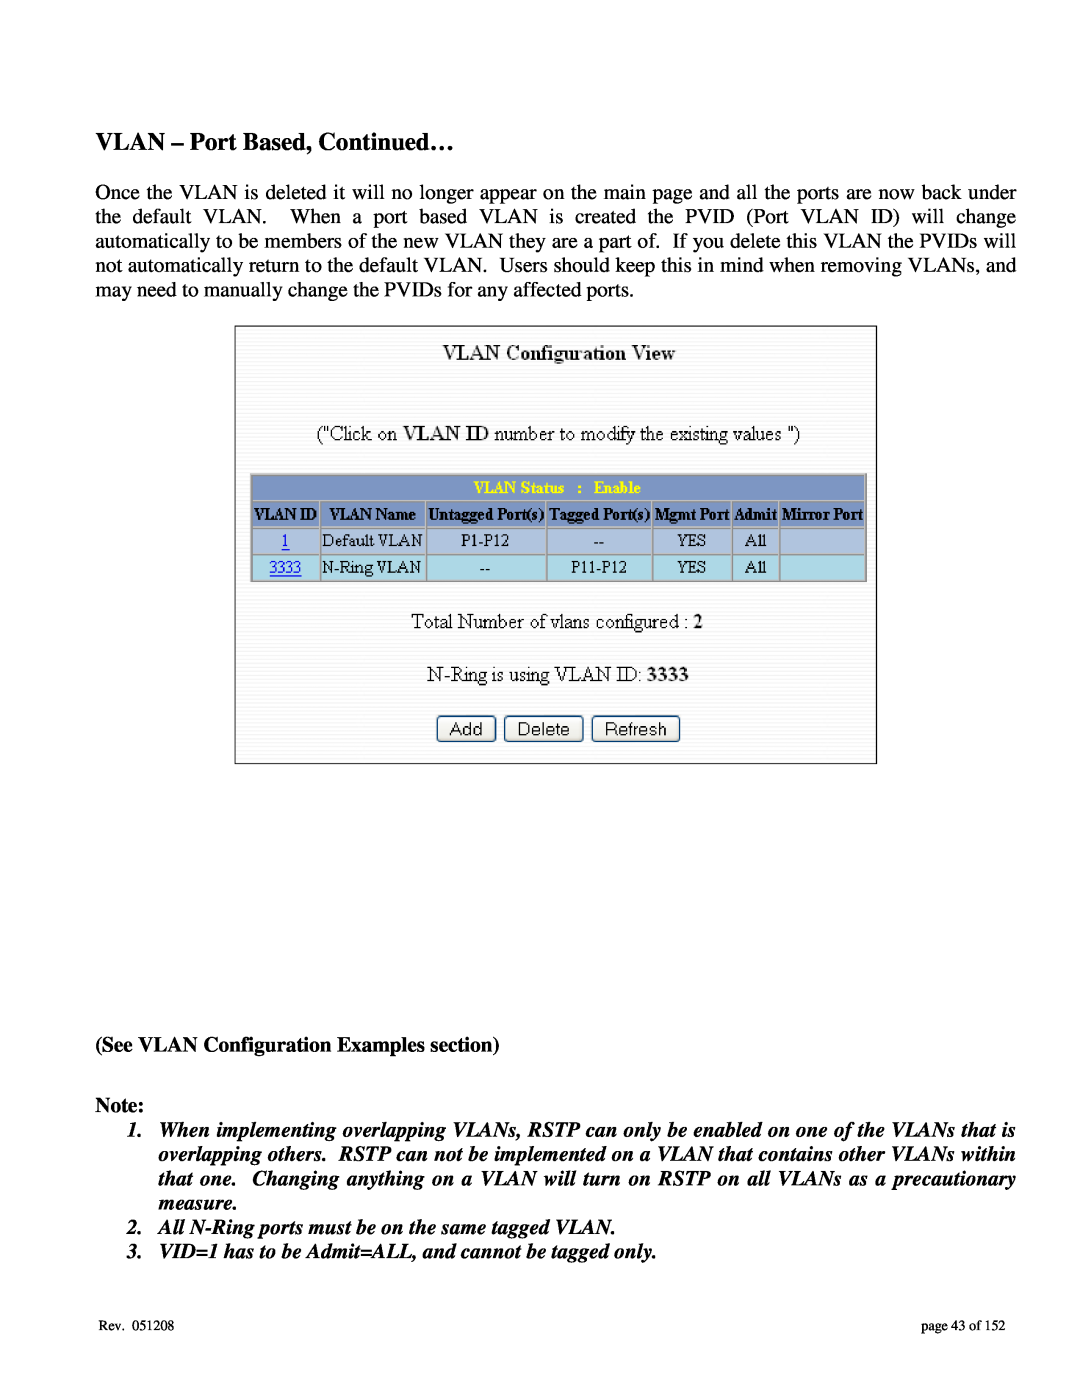 Gigabyte 7014 user manual VLAN - Port Based, Continued…, See VLAN Configuration Examples section, page 43 of 